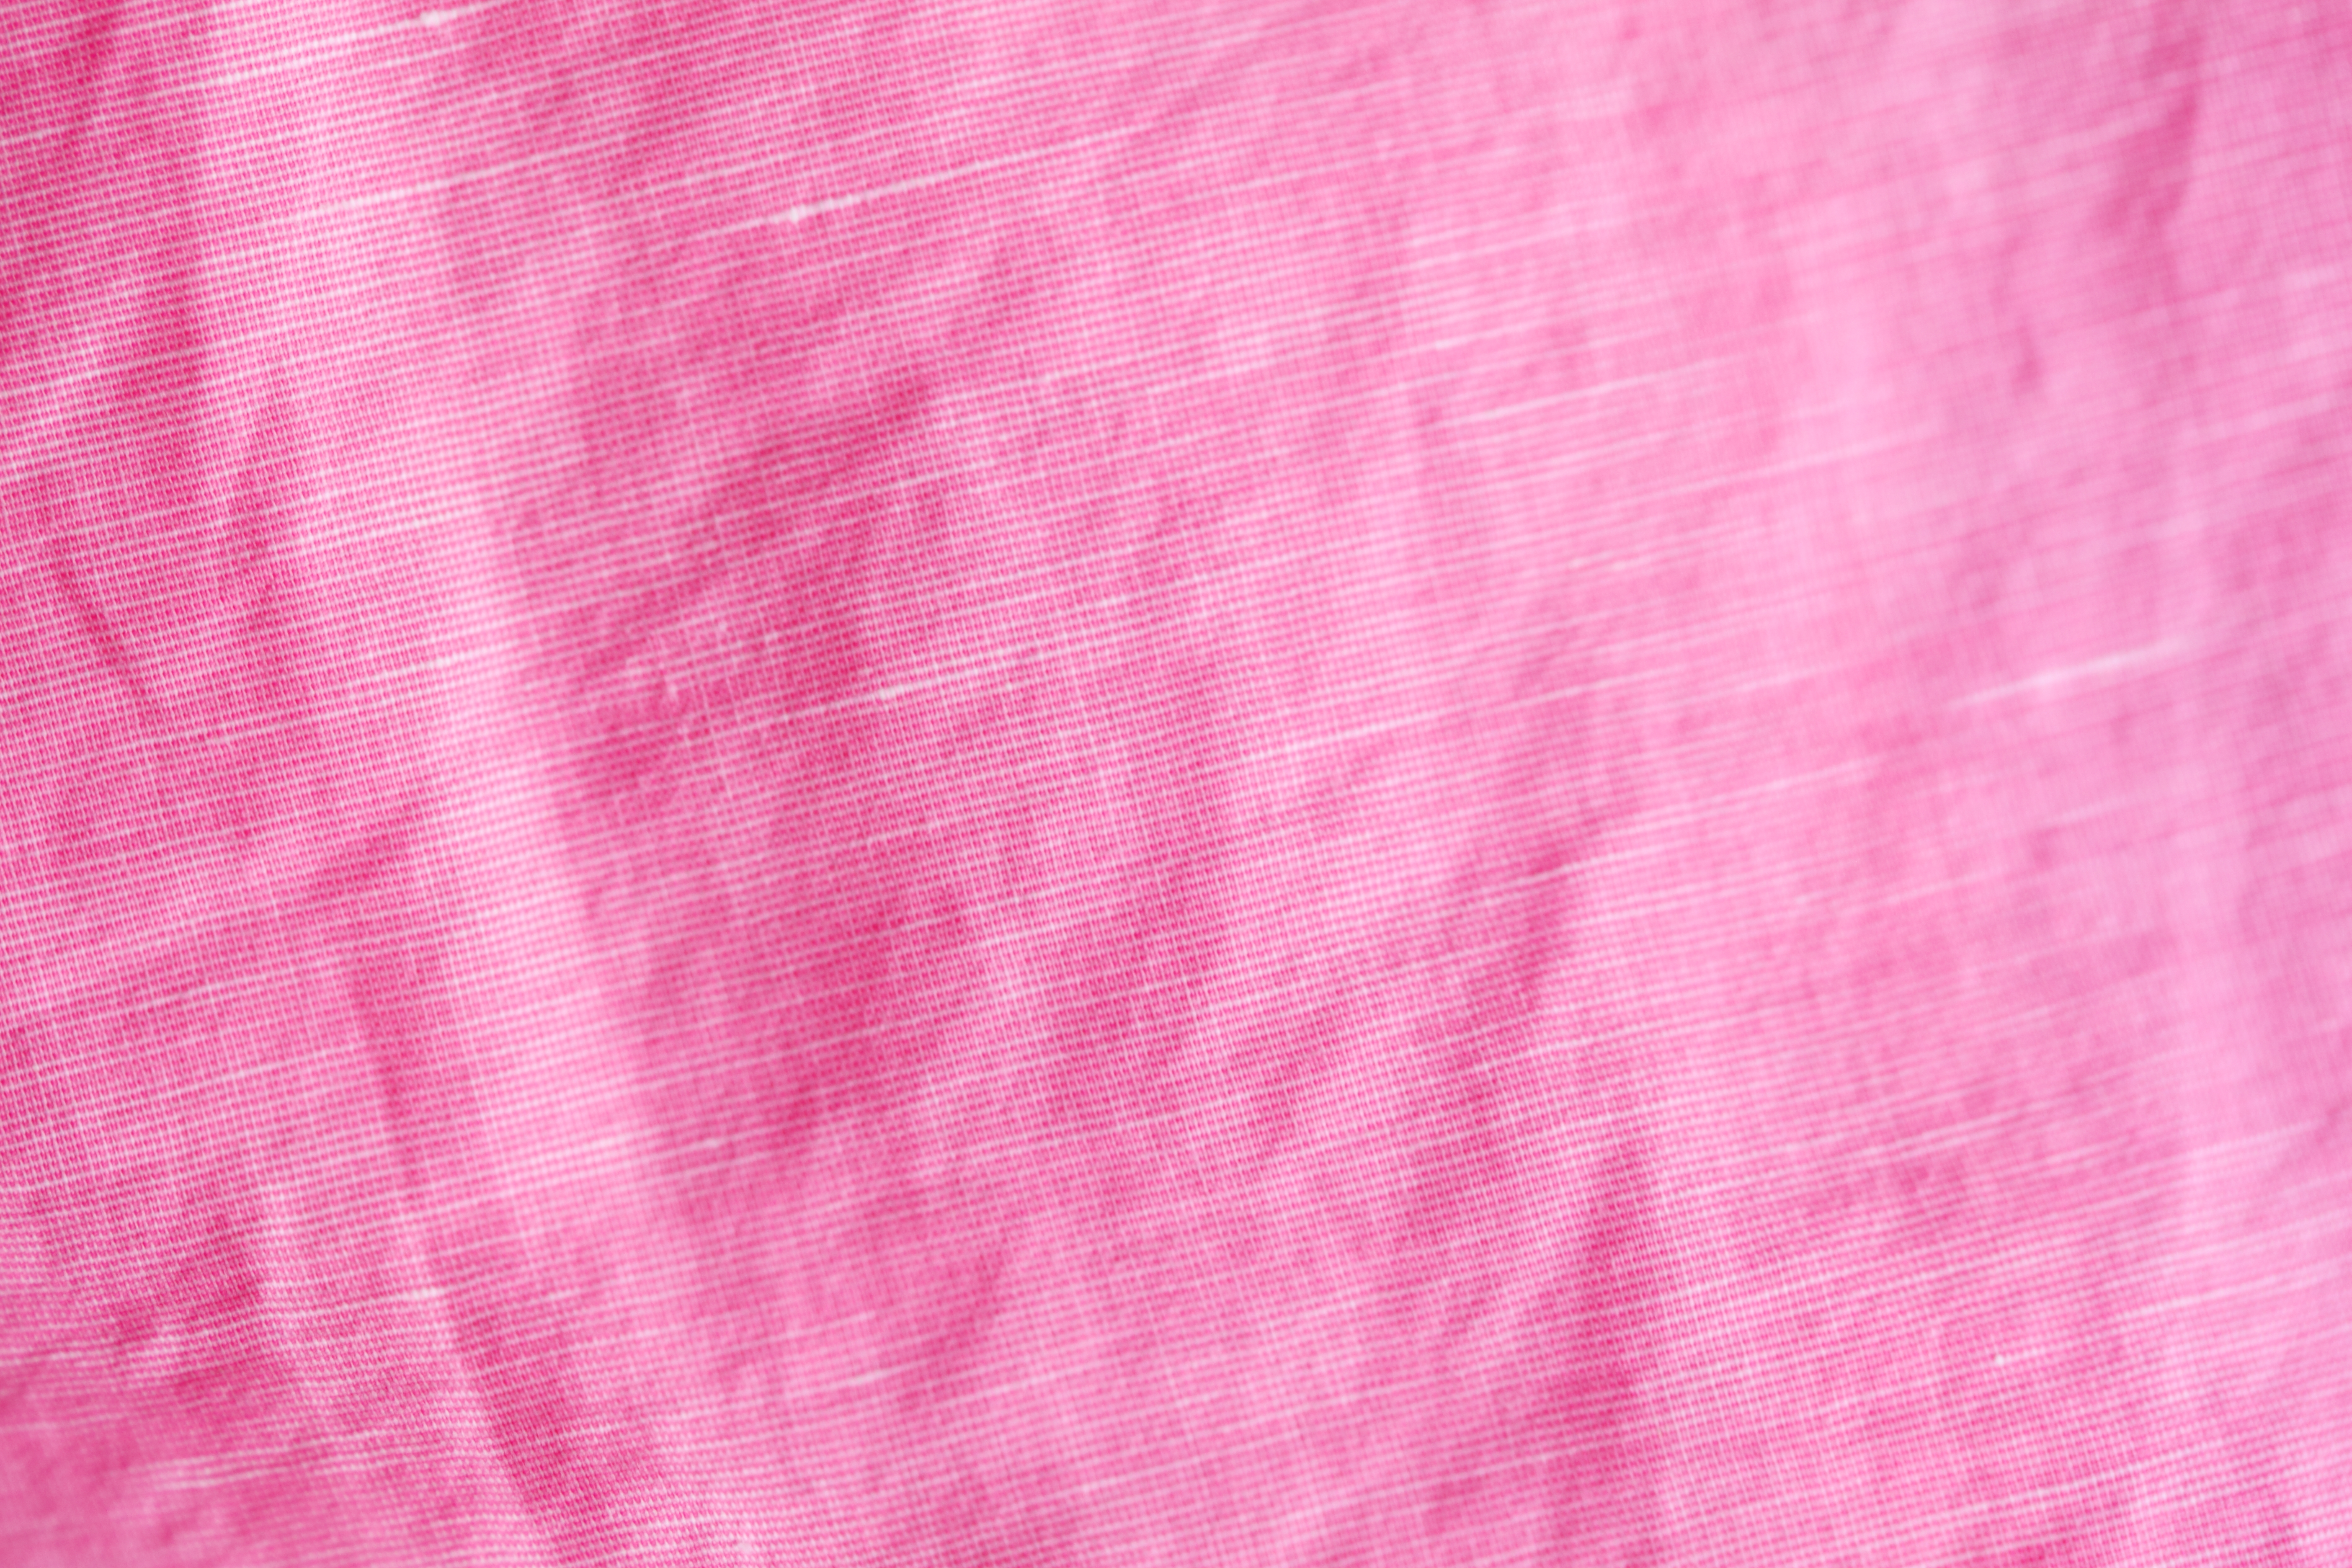 File:Pink Woven Cotton Silk Fabric Texture Free Creative Commons  (6962346249).jpg - Wikimedia Commons